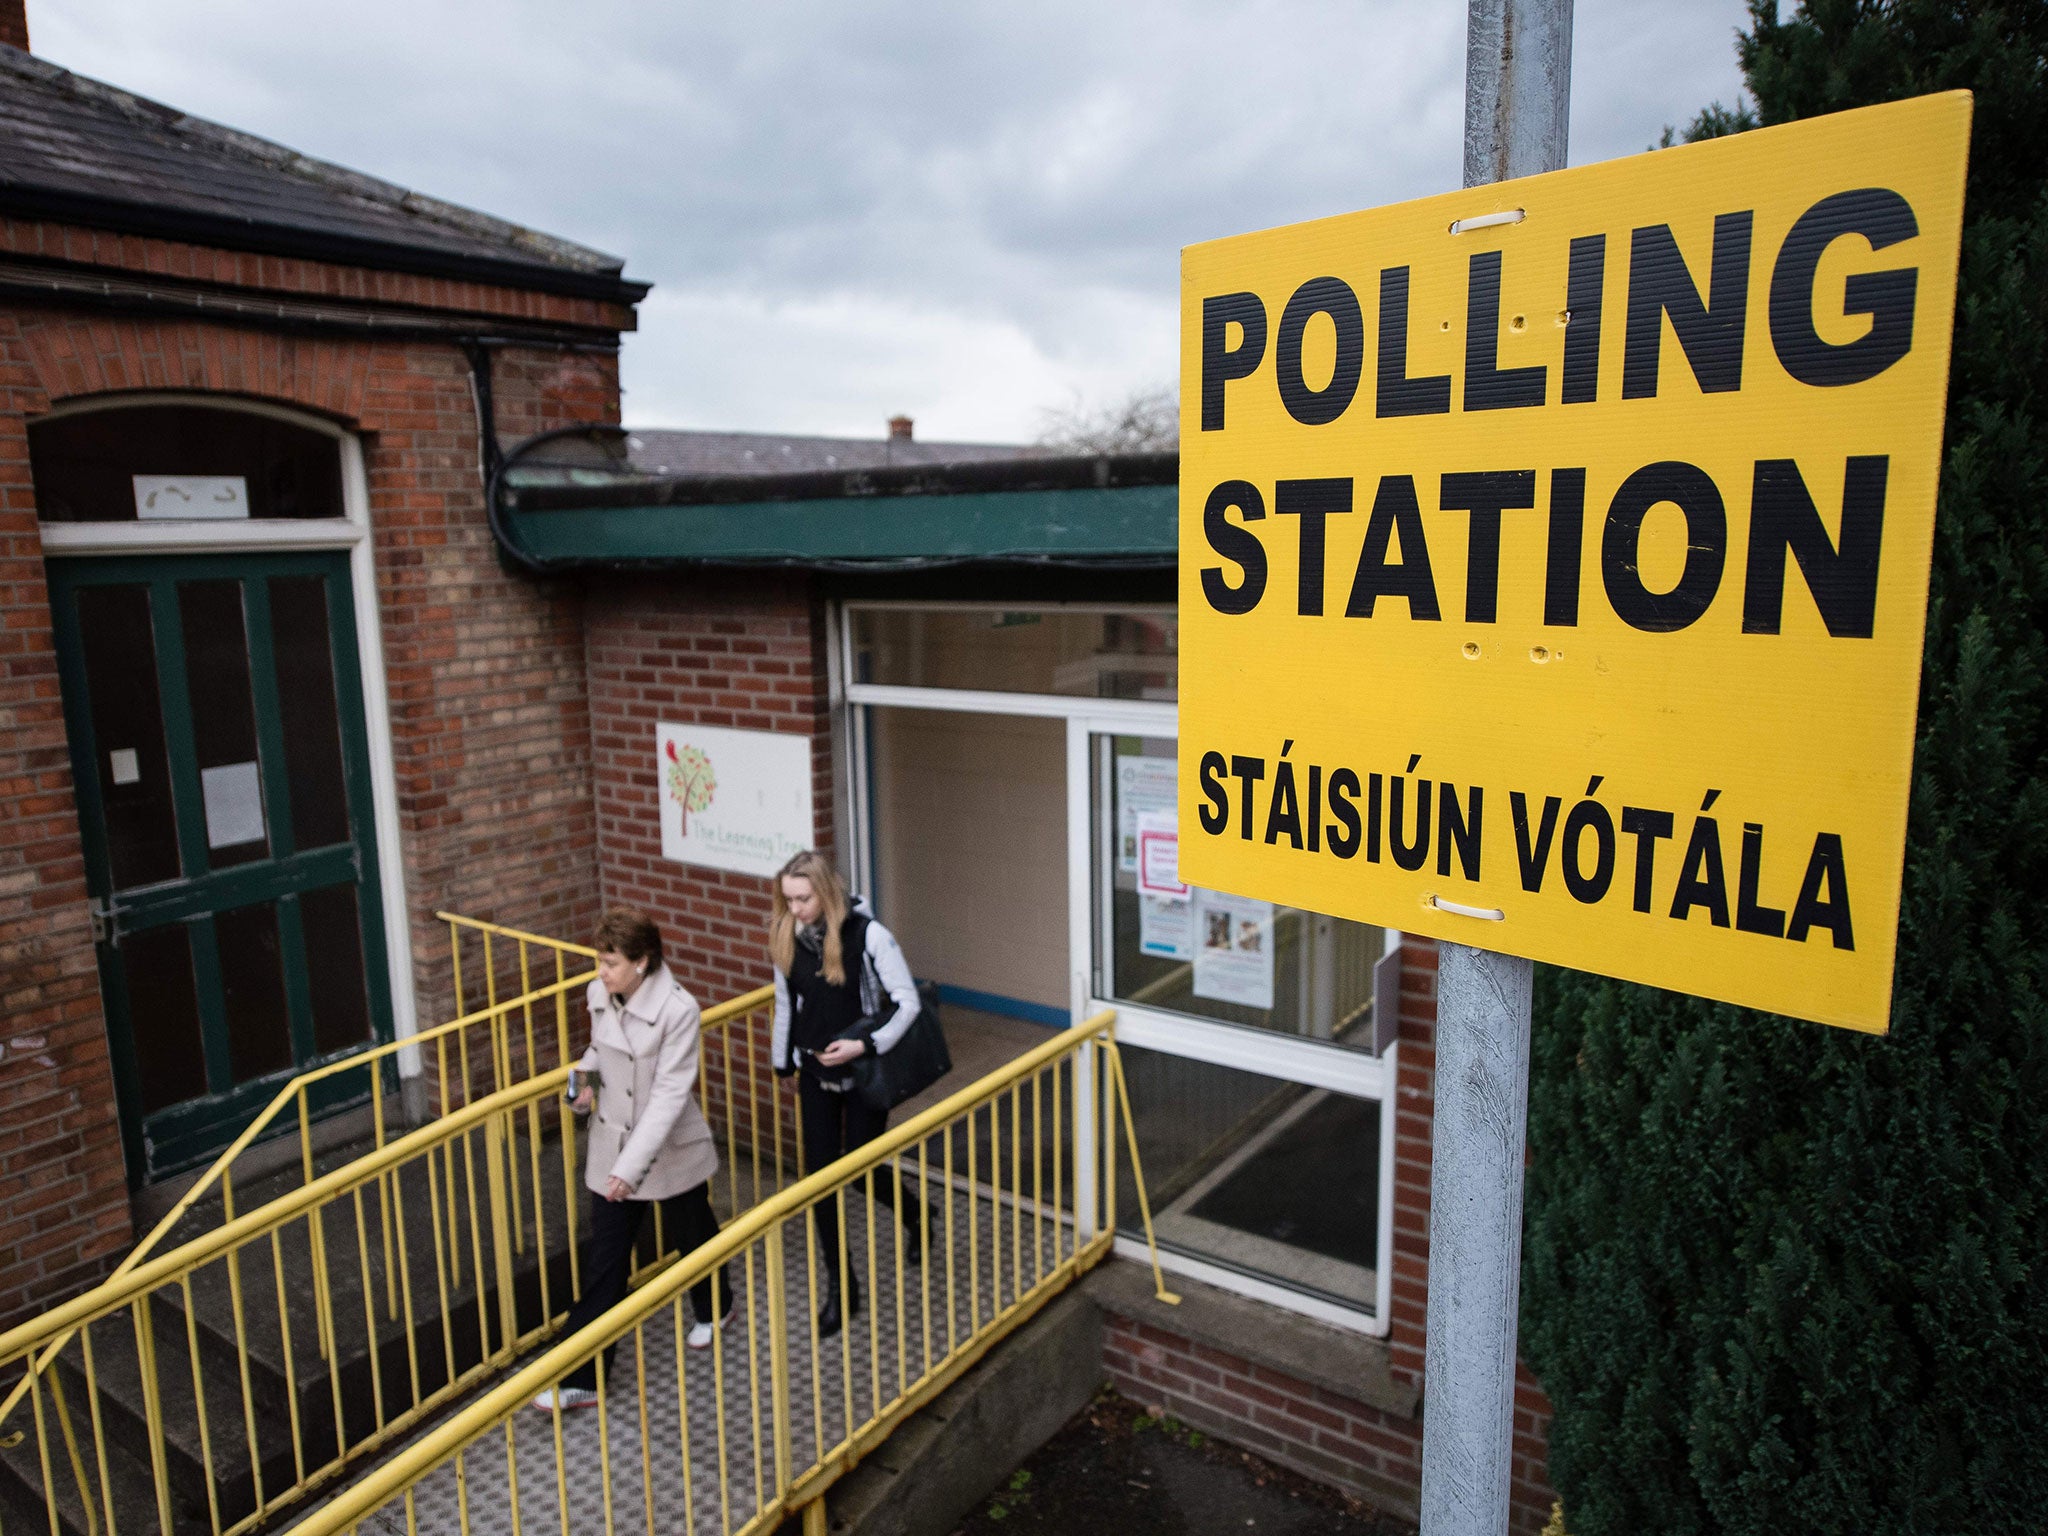 The people of Ireland took to the polls yesterday to elect a new Dáil